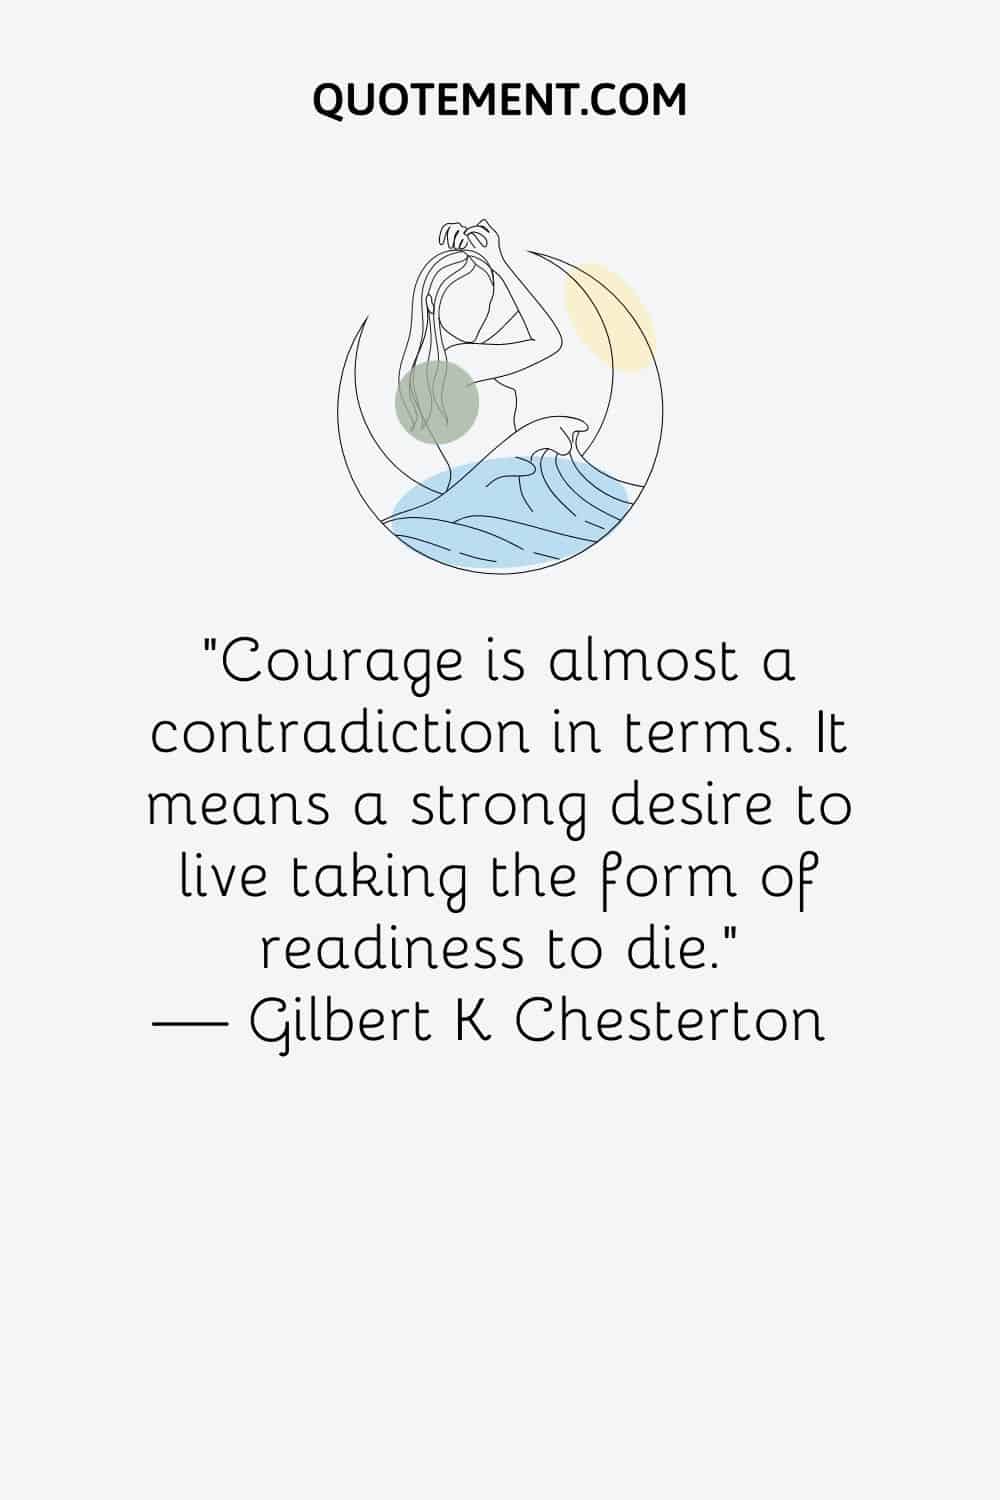 “Courage is almost a contradiction in terms. It means a strong desire to live taking the form of readiness to die.” ― Gilbert K Chesterton